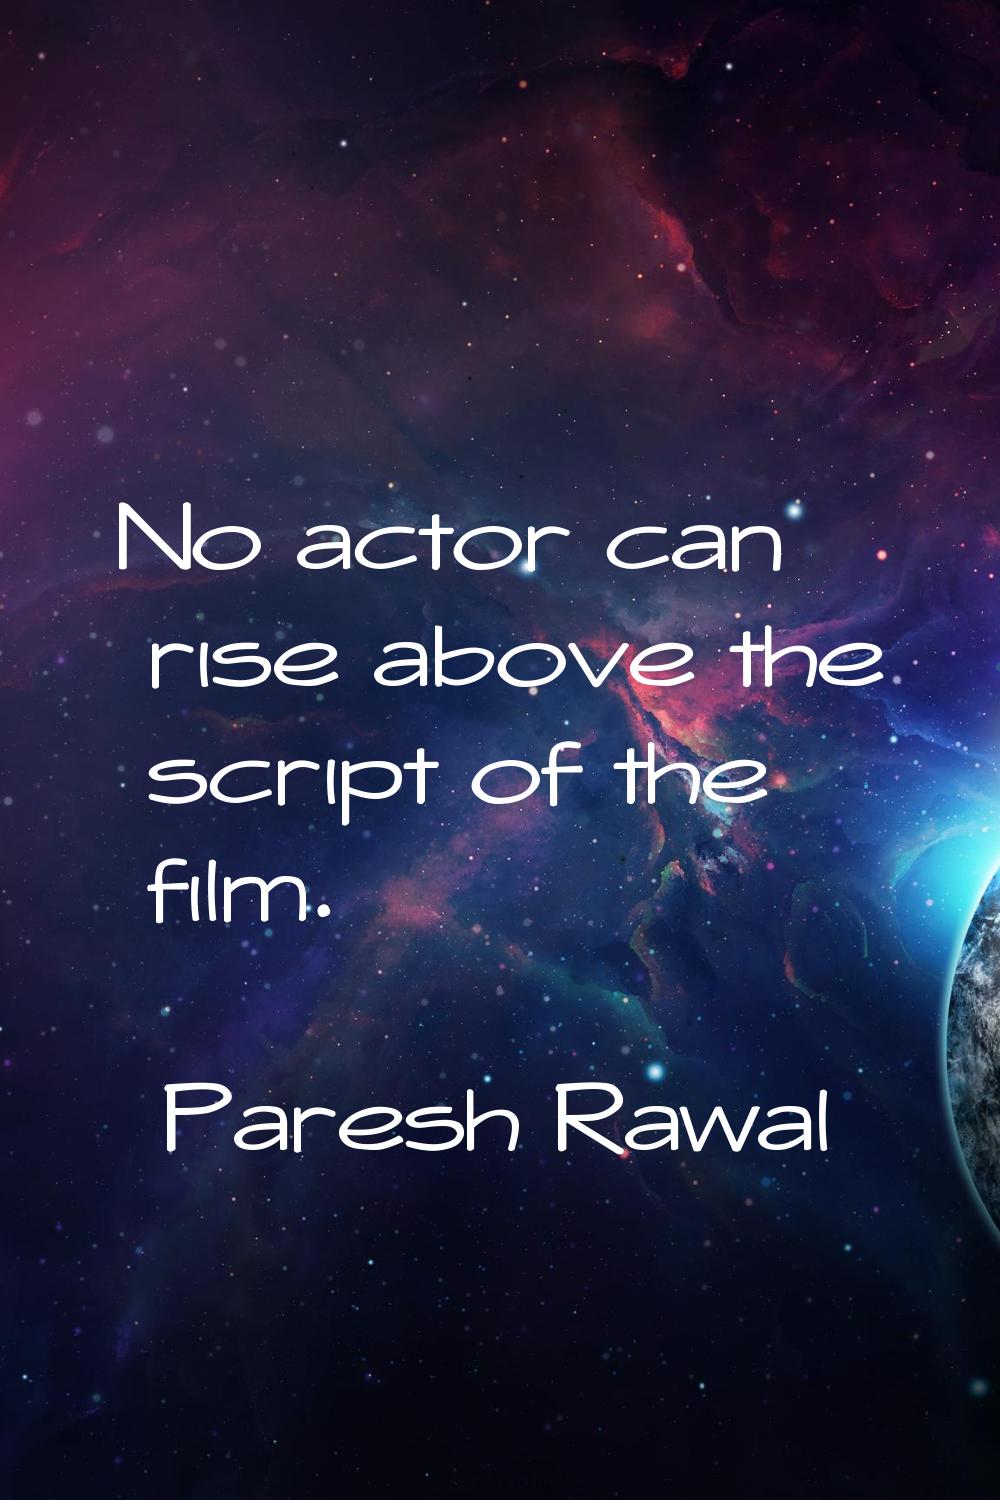 No actor can rise above the script of the film.